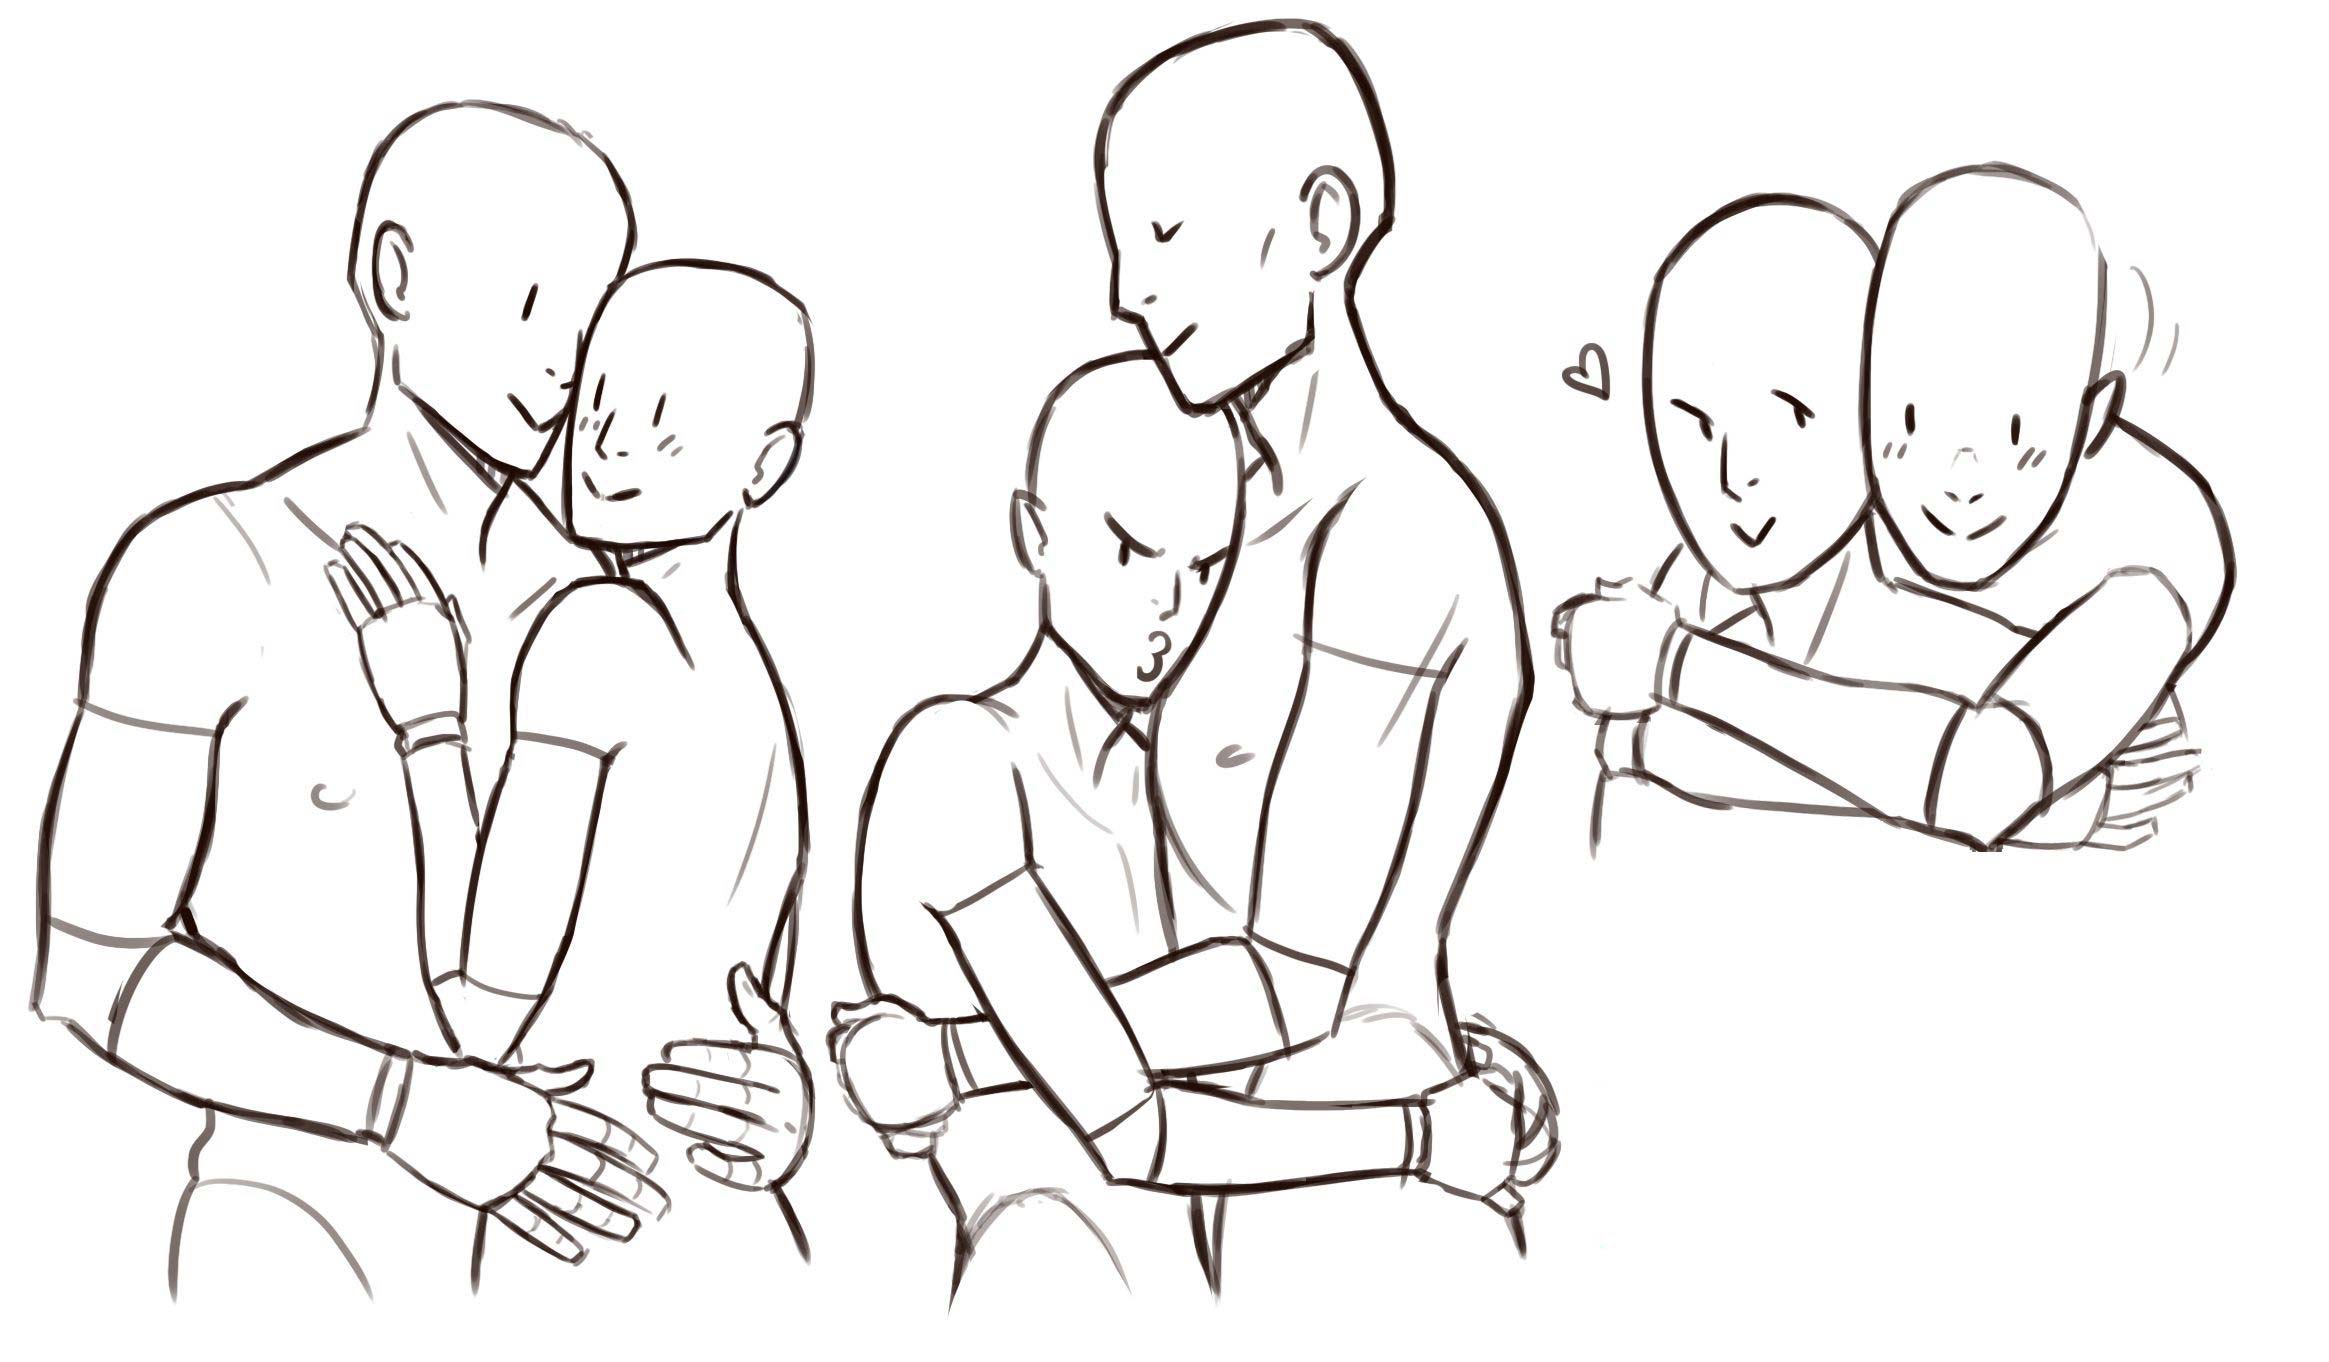 Hug Drawing Reference and Sketches for Artists